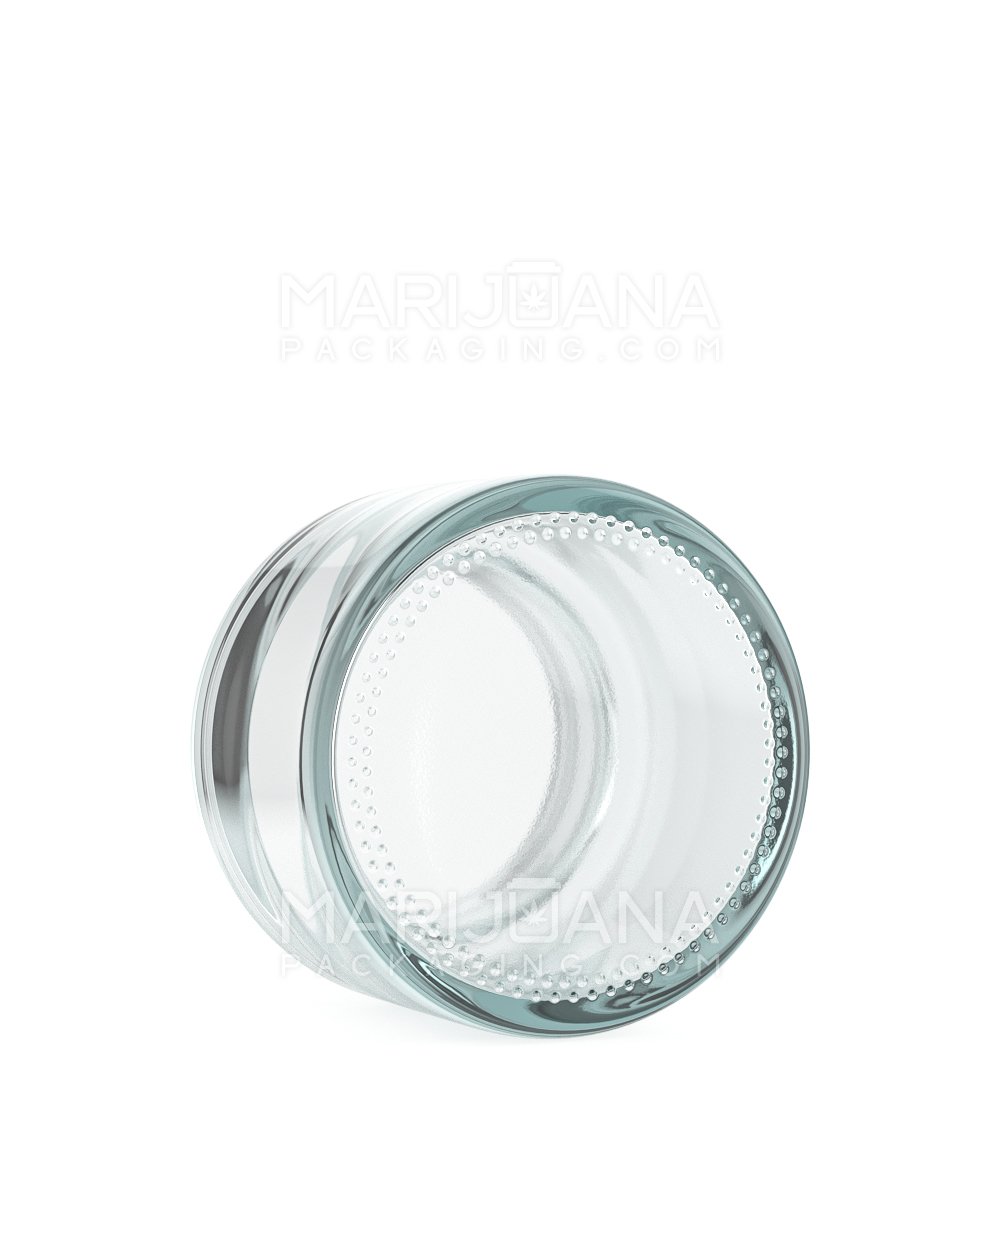 Straight Sided Clear Glass Jars | 53mm - 2.5oz - 32 Count - 5